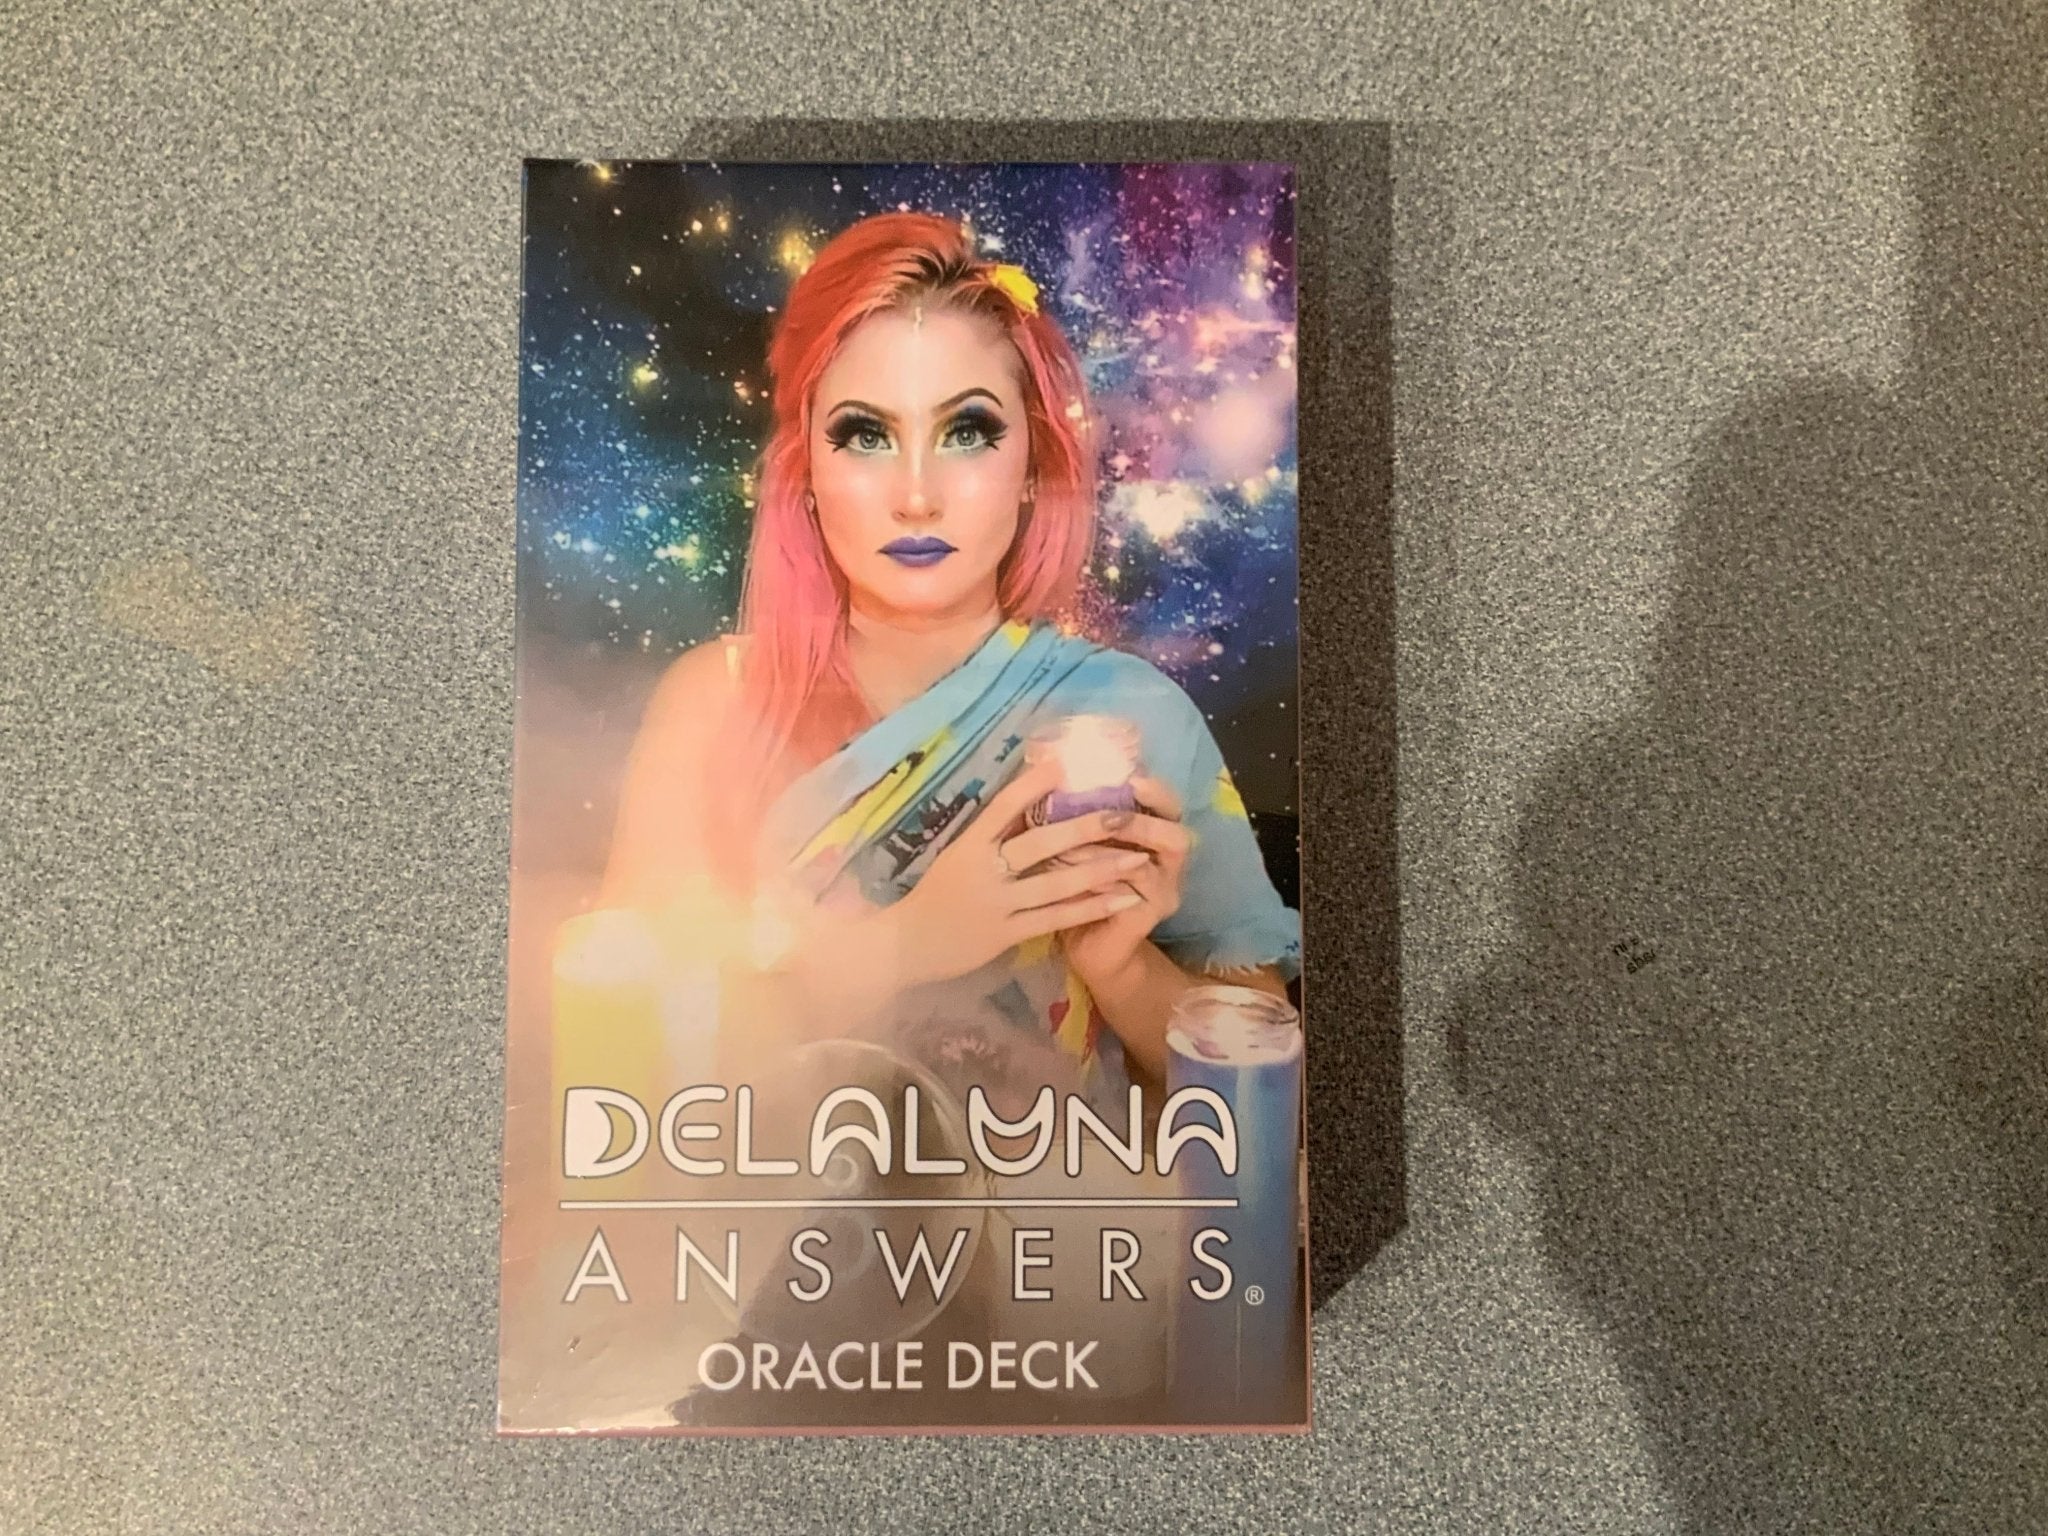 Delaluna Answers Oracle Deck - Spiral Circle